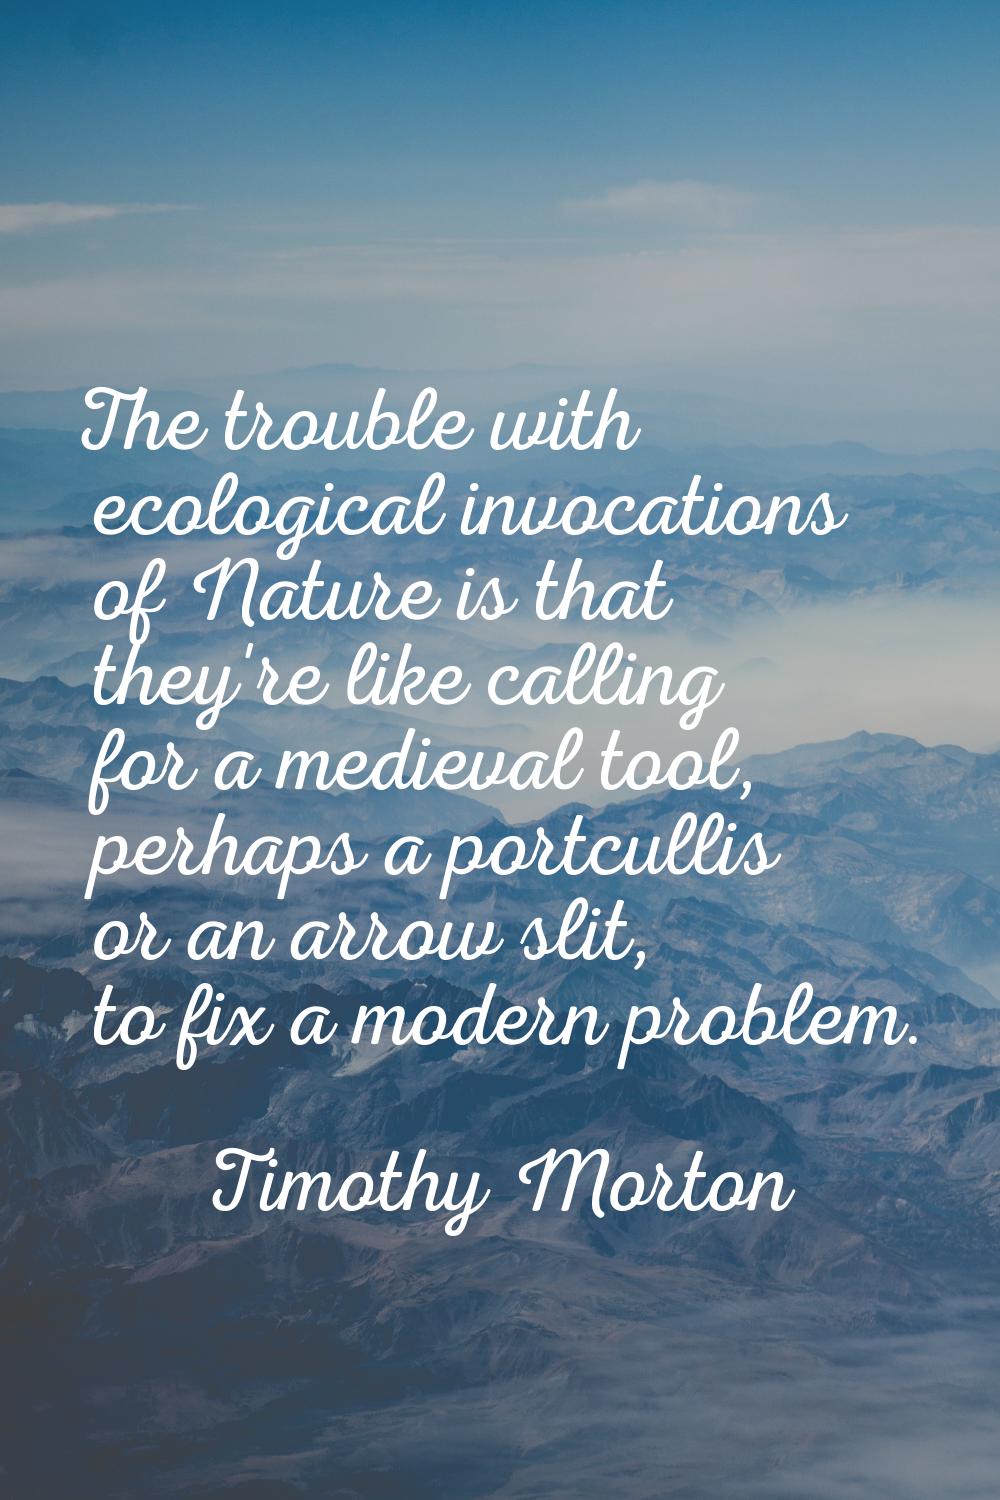 The trouble with ecological invocations of Nature is that they're like calling for a medieval tool,